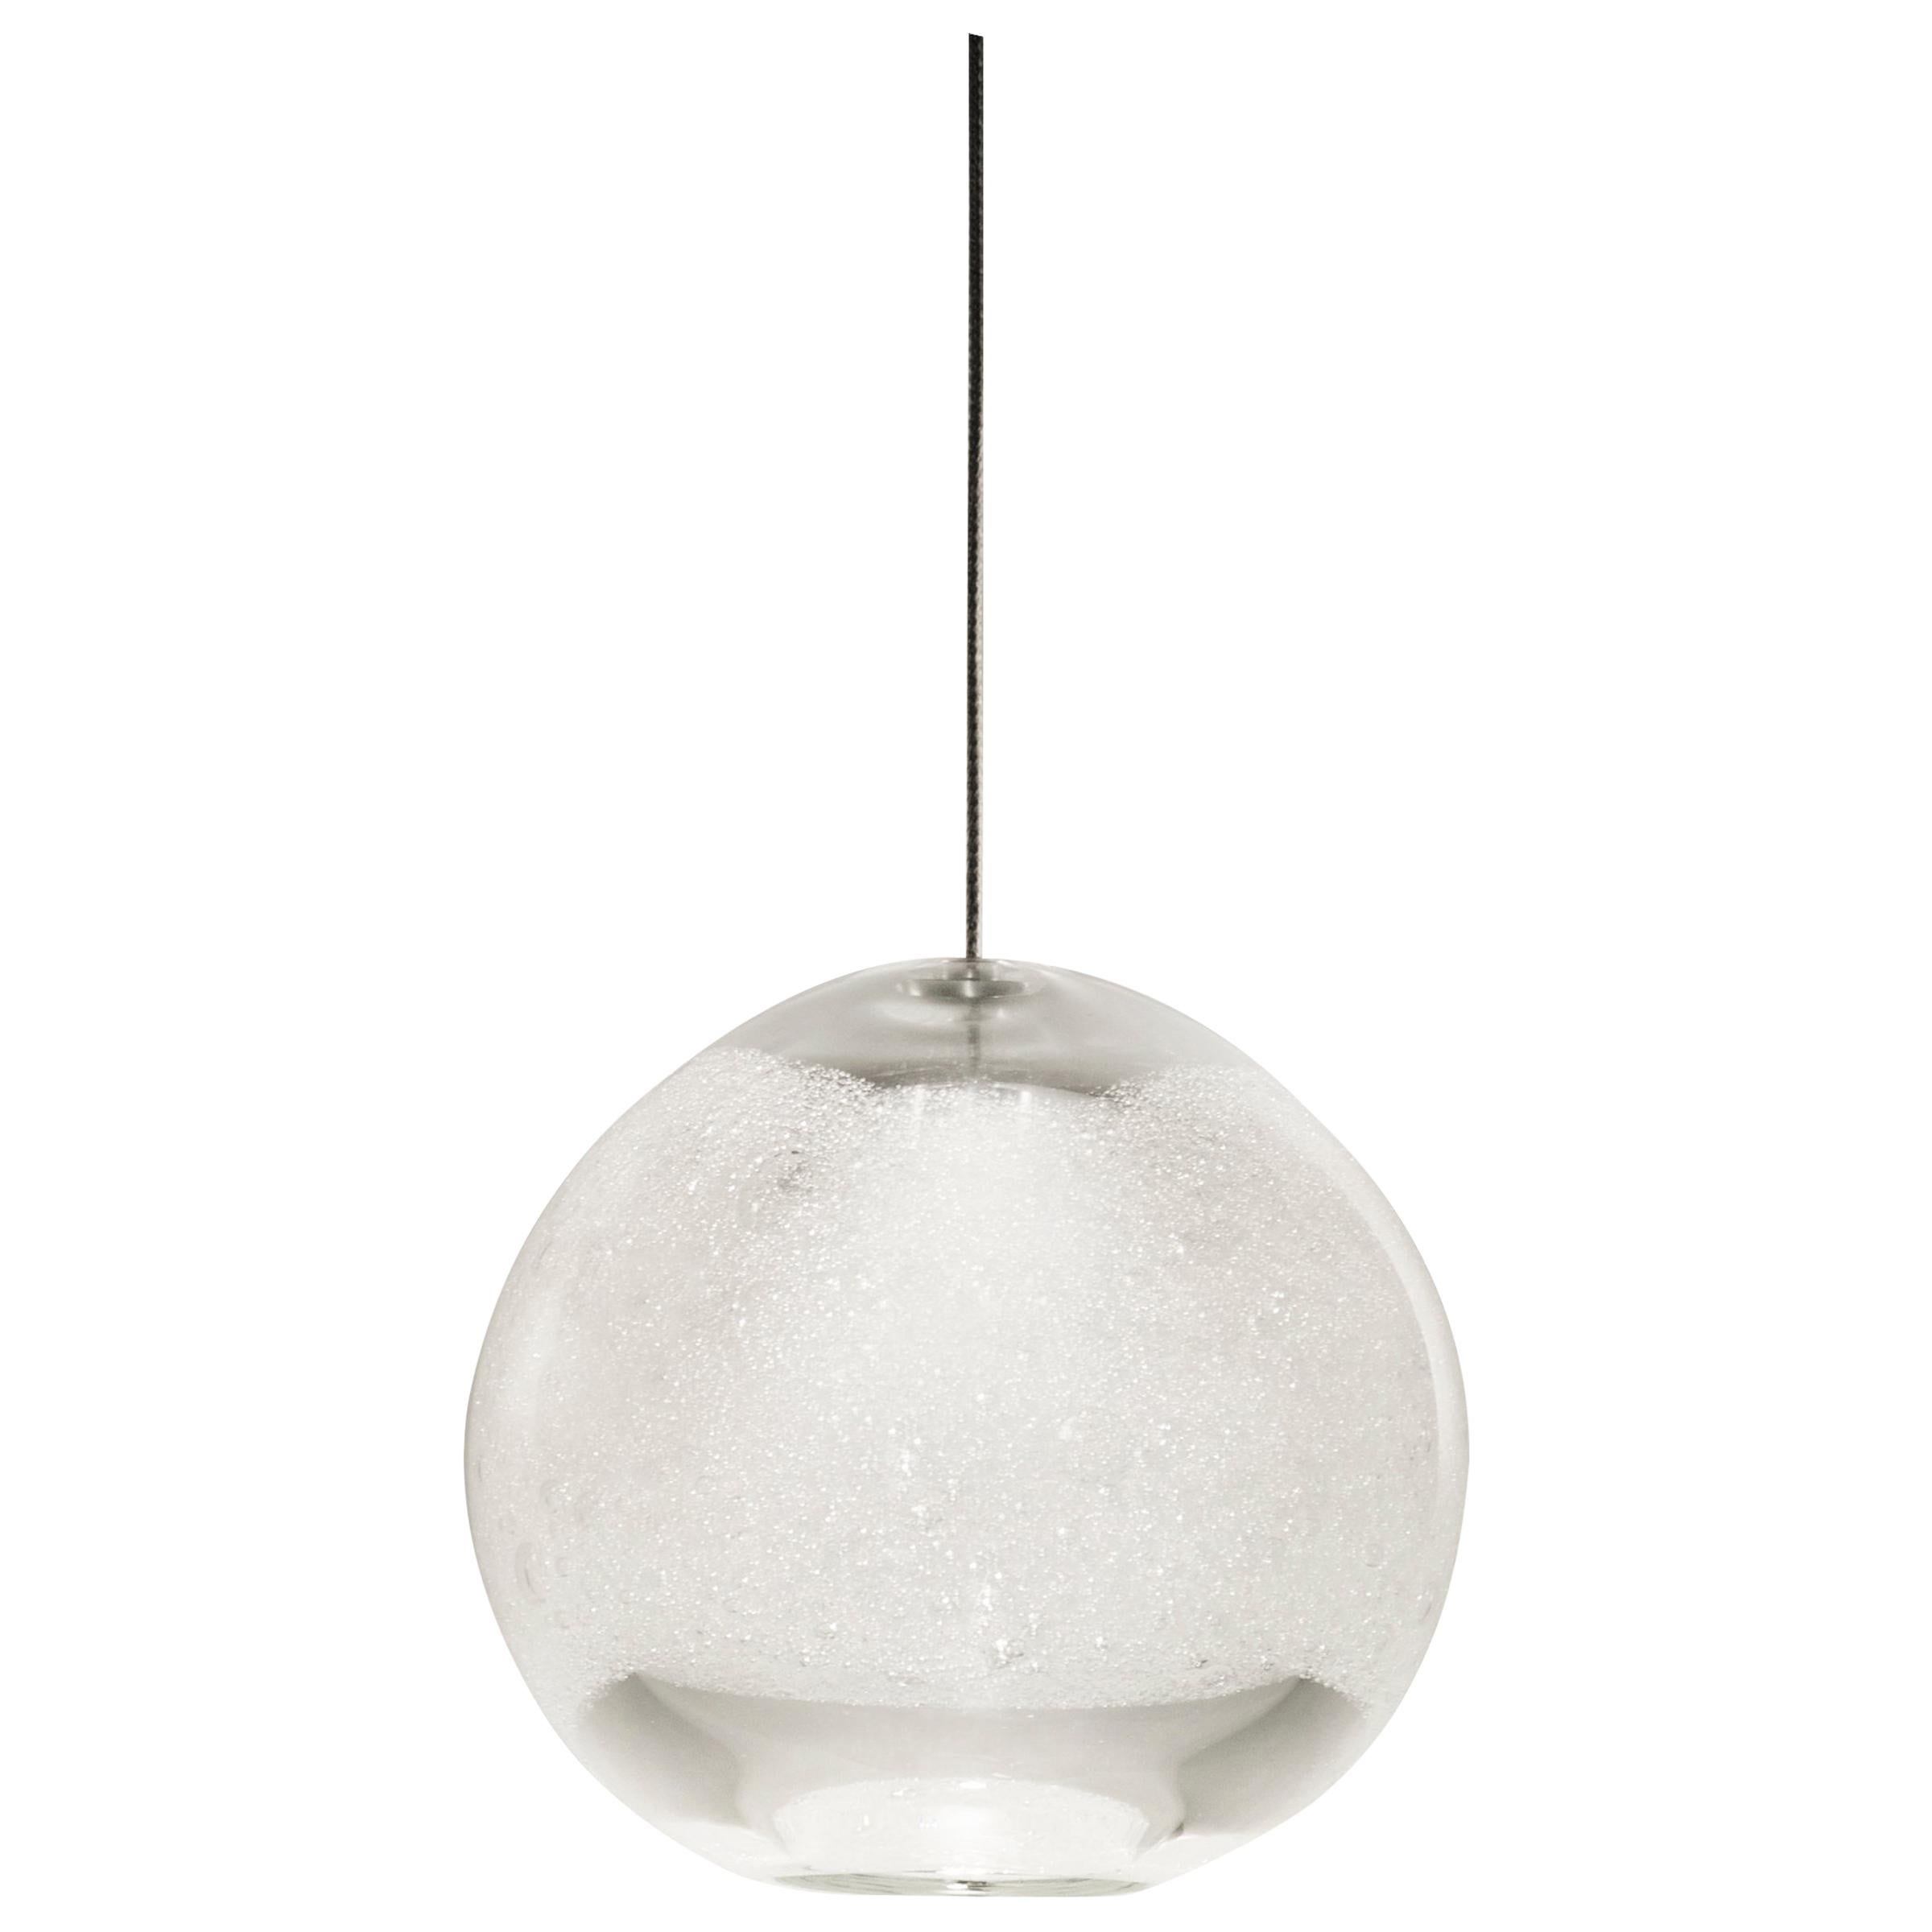 Small Orb Pendant Light, Hand Blown Clear Glass with Bubbles - Made to Order